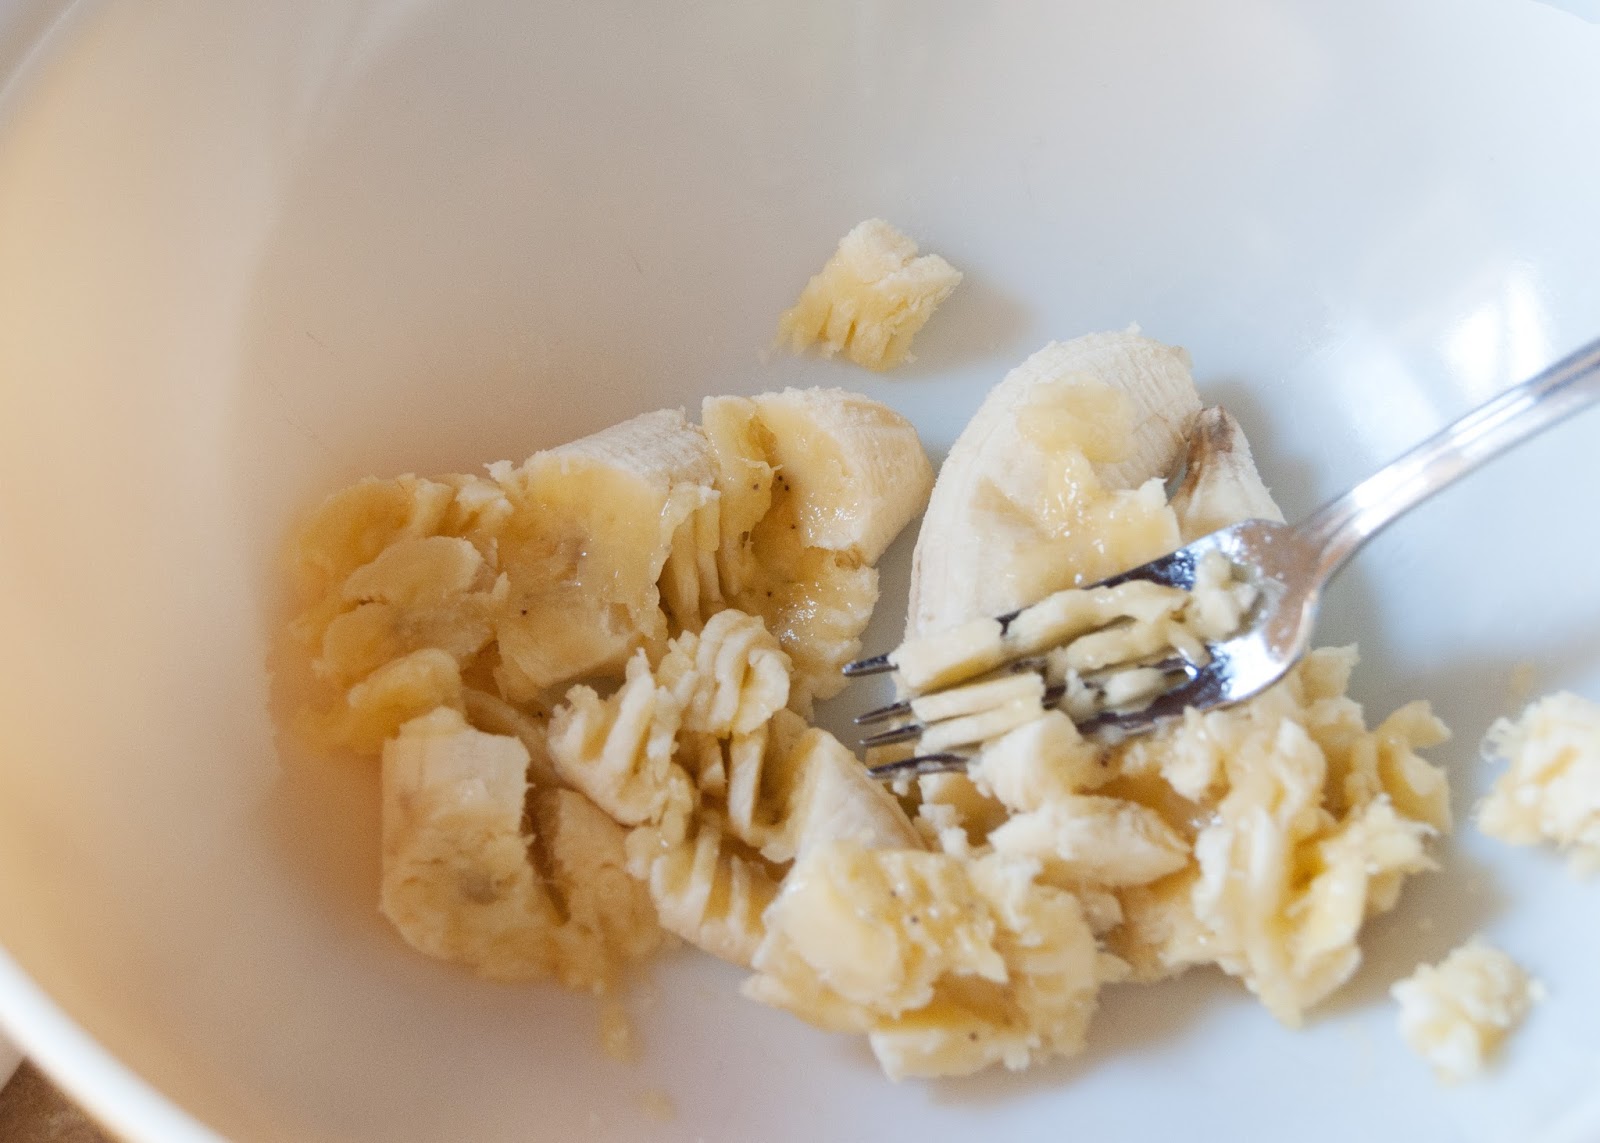 Step 1: Smash your 2 bananas with a fork in a large mixing bowl.